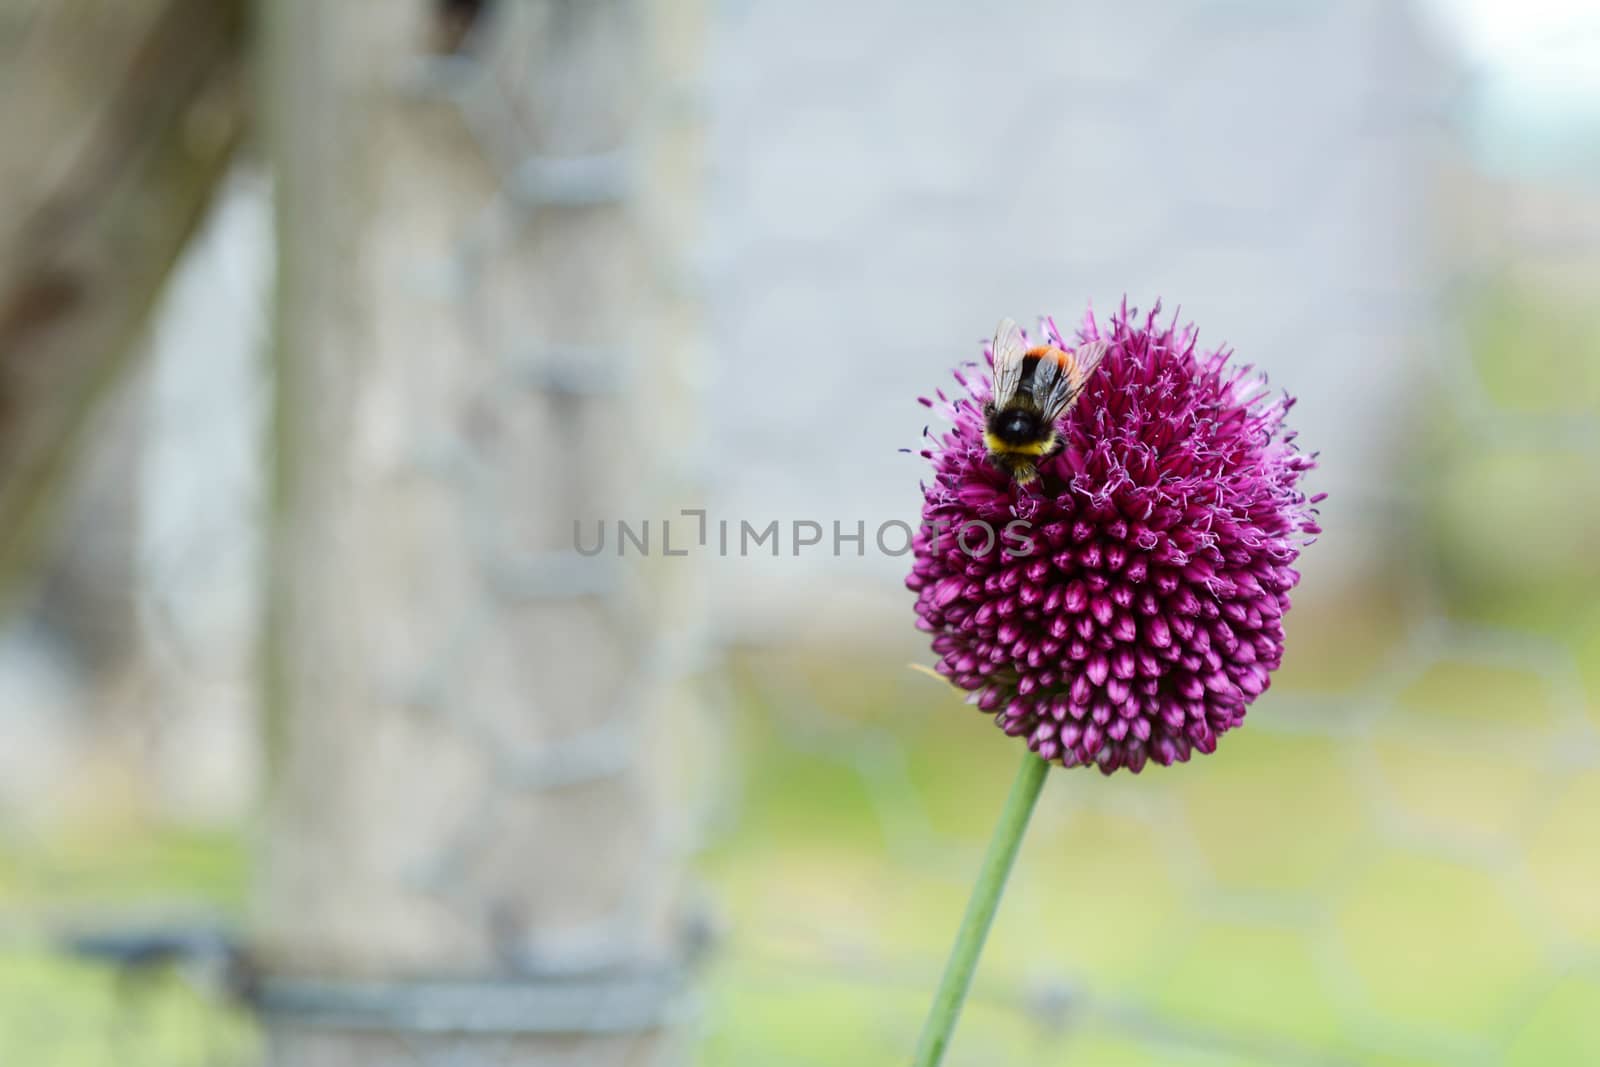 Red-tailed bumblebee on a purple allium flower by sarahdoow